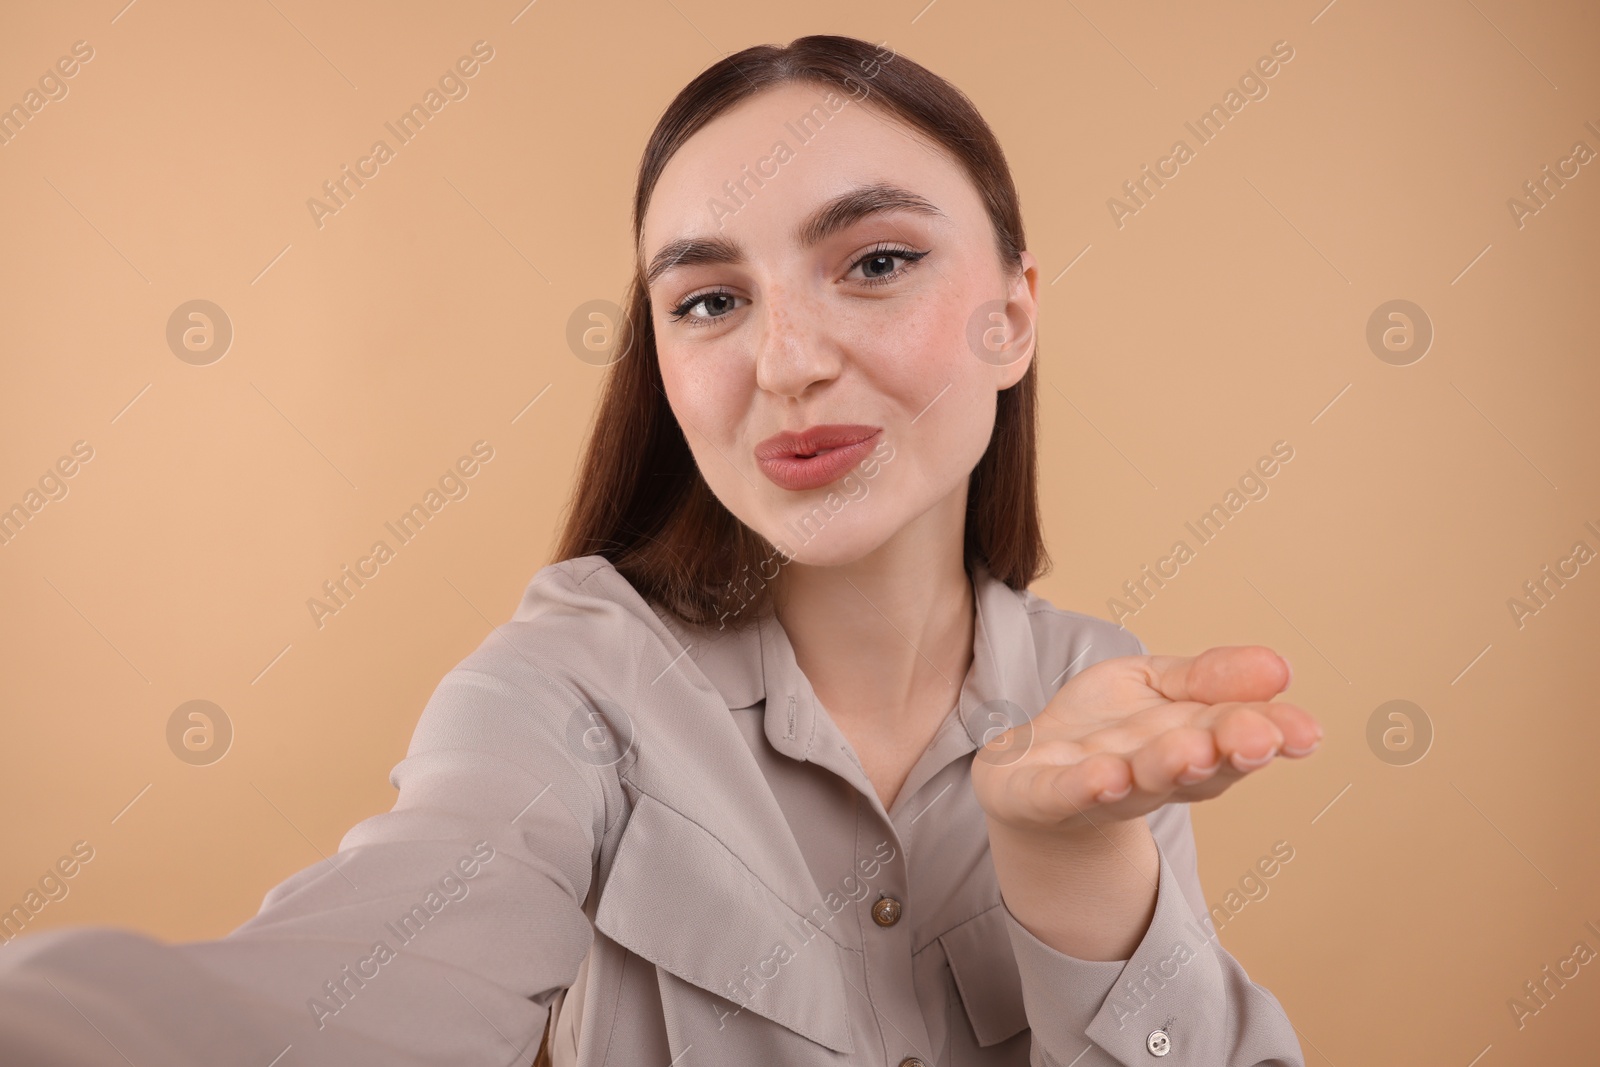 Photo of Beautiful woman taking selfie and blowing kiss on beige background